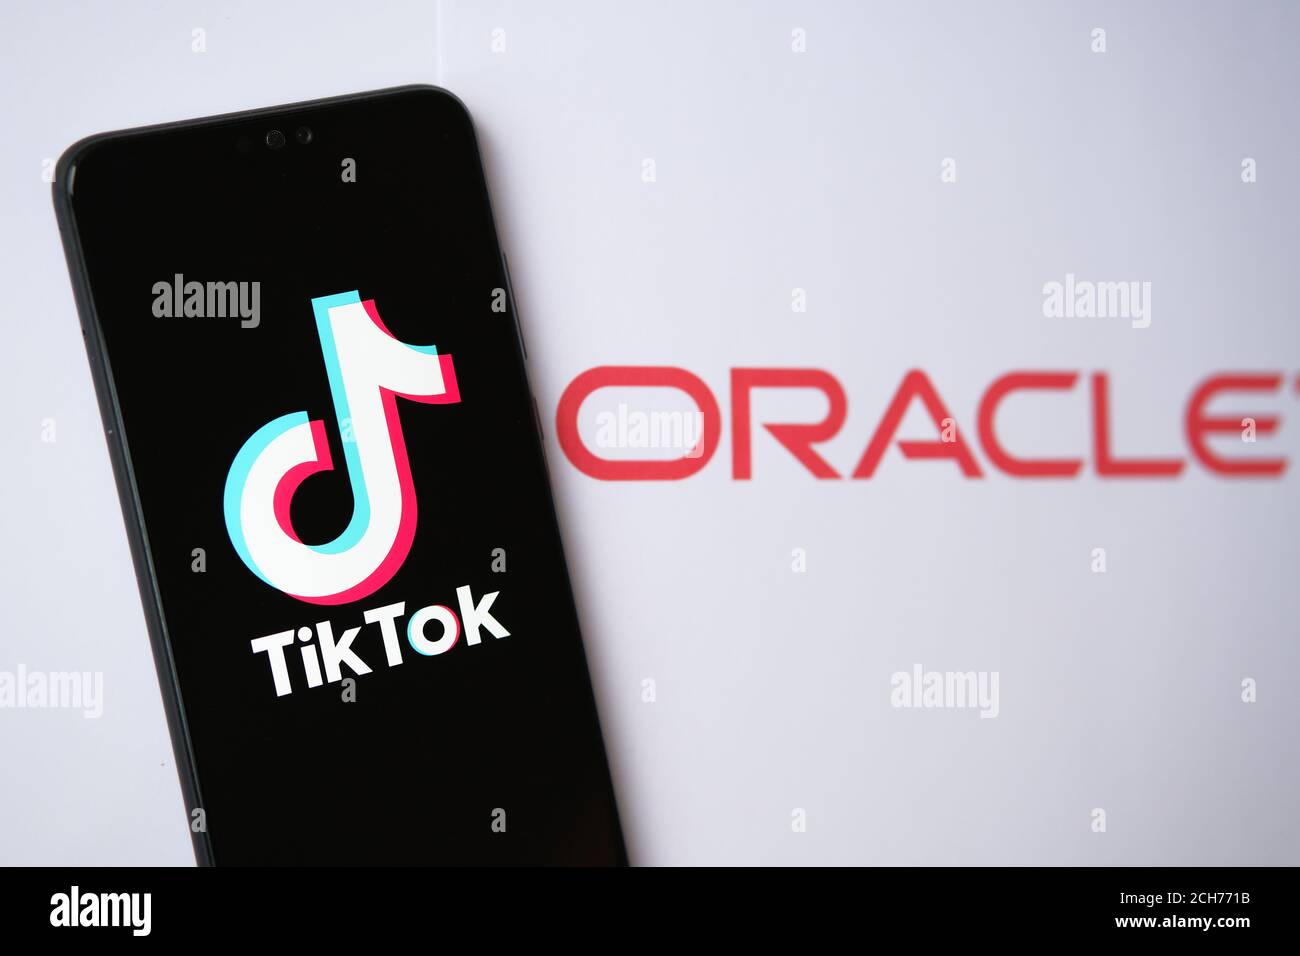 TikTok and Oracle partnership concept photo. TikTok logo seen on the smartphone and Oracle company logo seen on the blurred background. Stock Photo